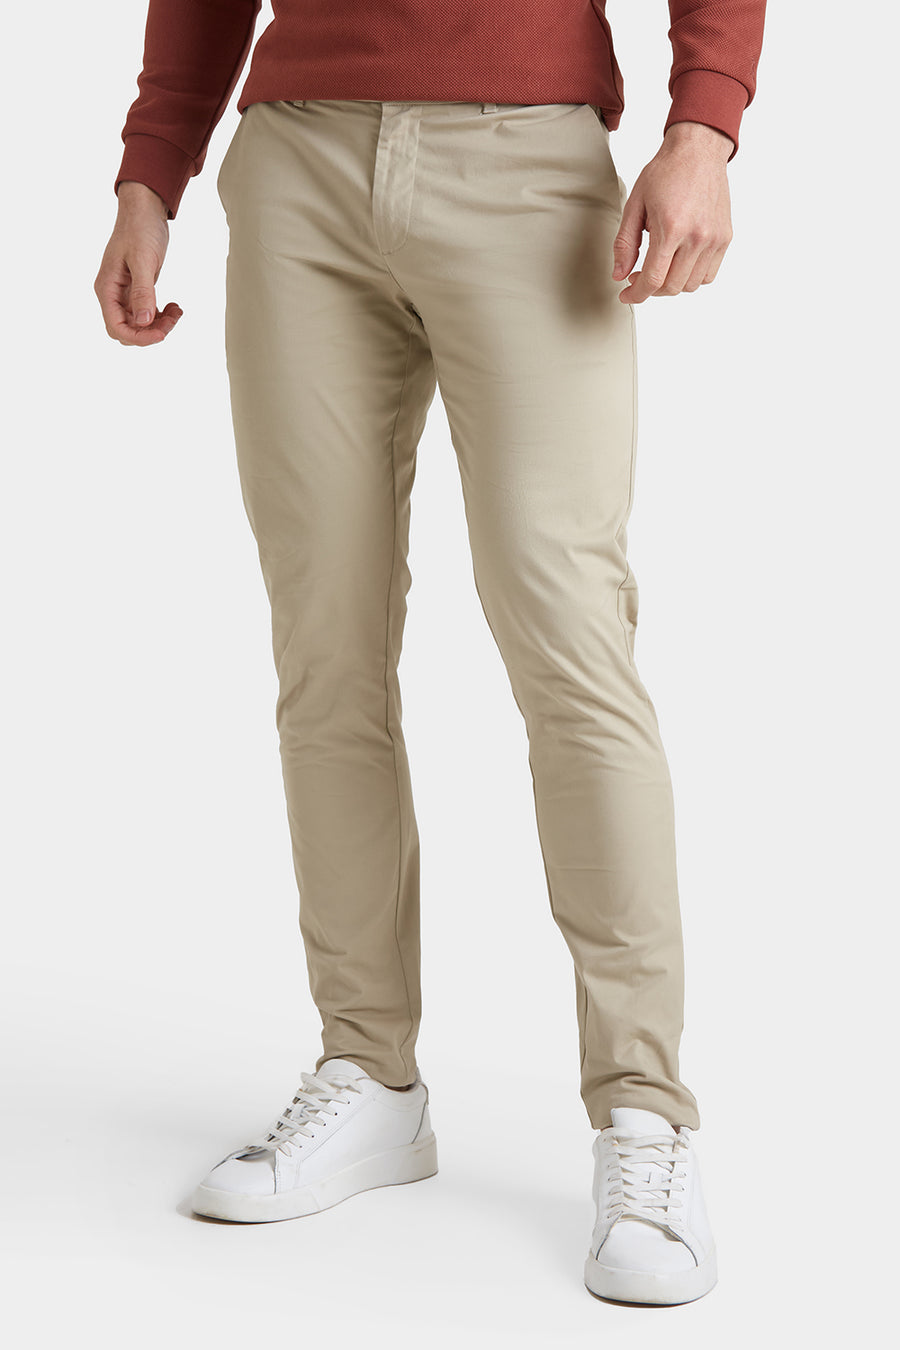 Athletic Fit Cotton Stretch Chino Pants in Stone - TAILORED ATHLETE - USA